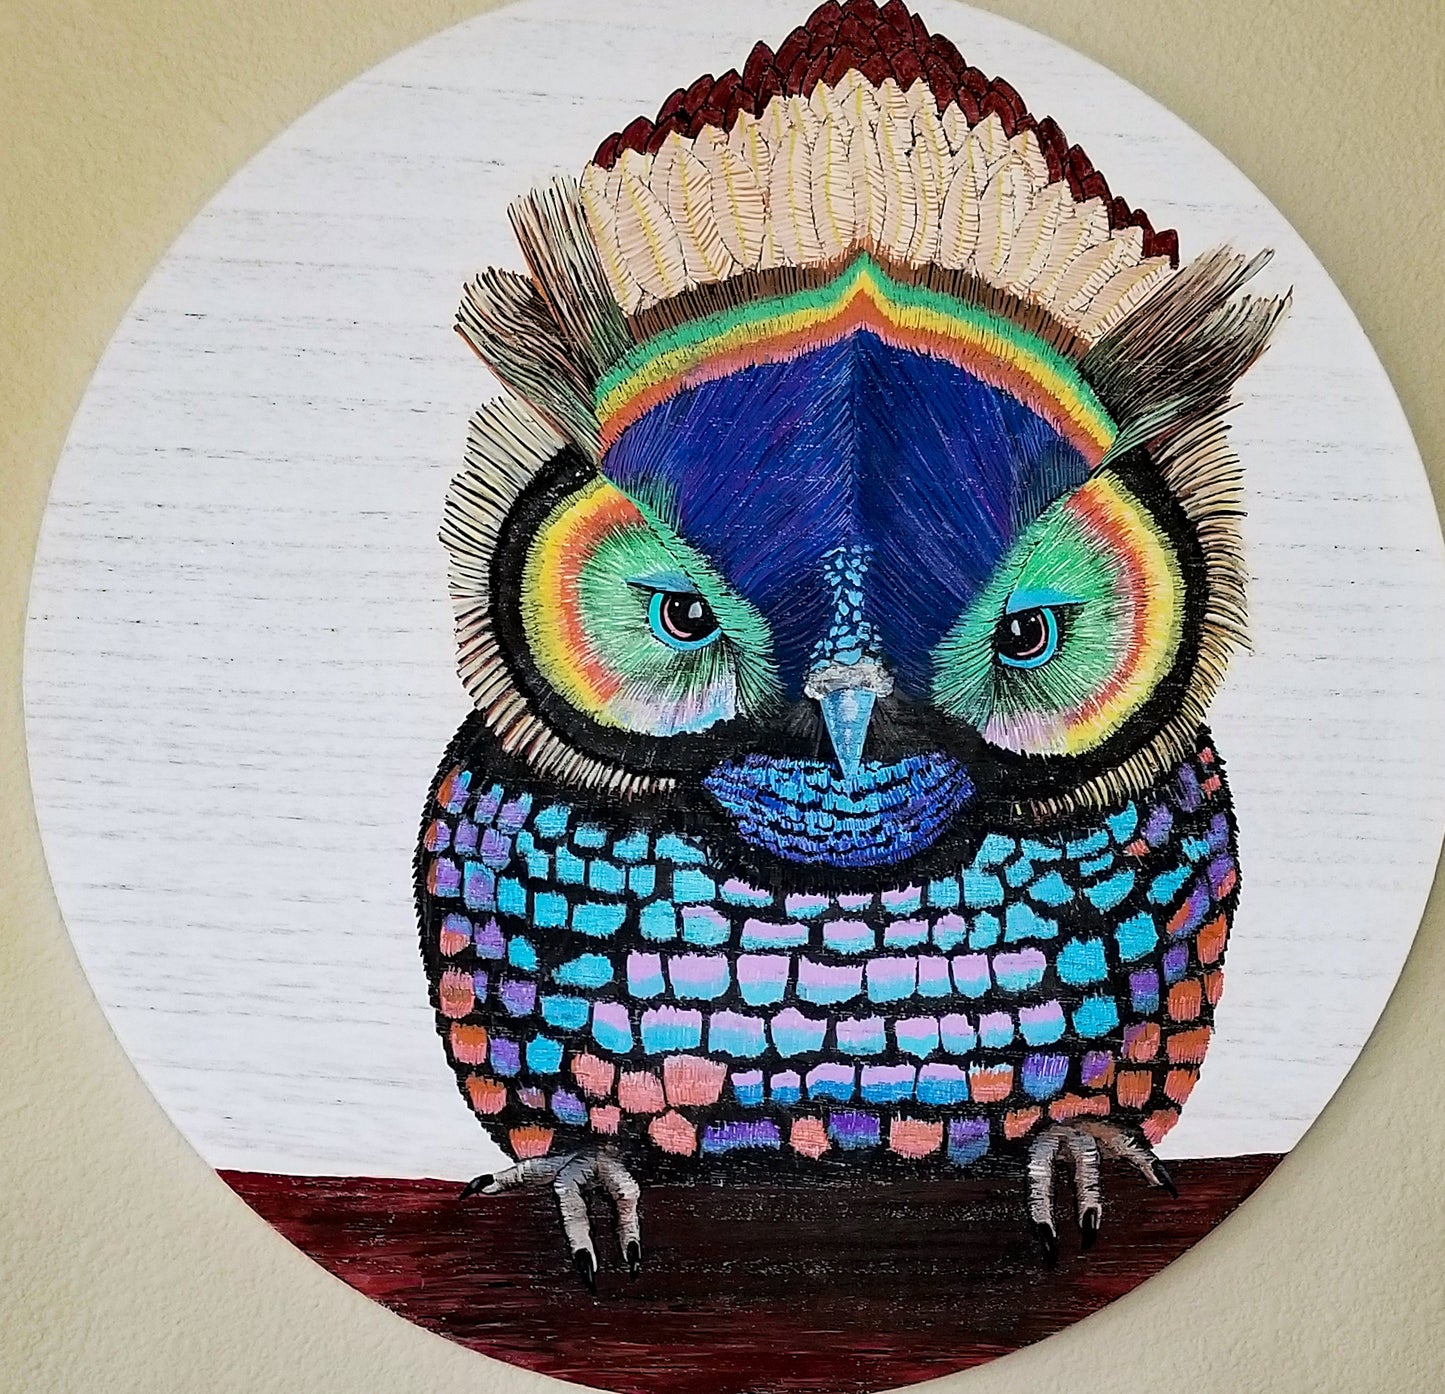 18" Round Wood Panel with Fantasy Owl in Blue & Green Shades